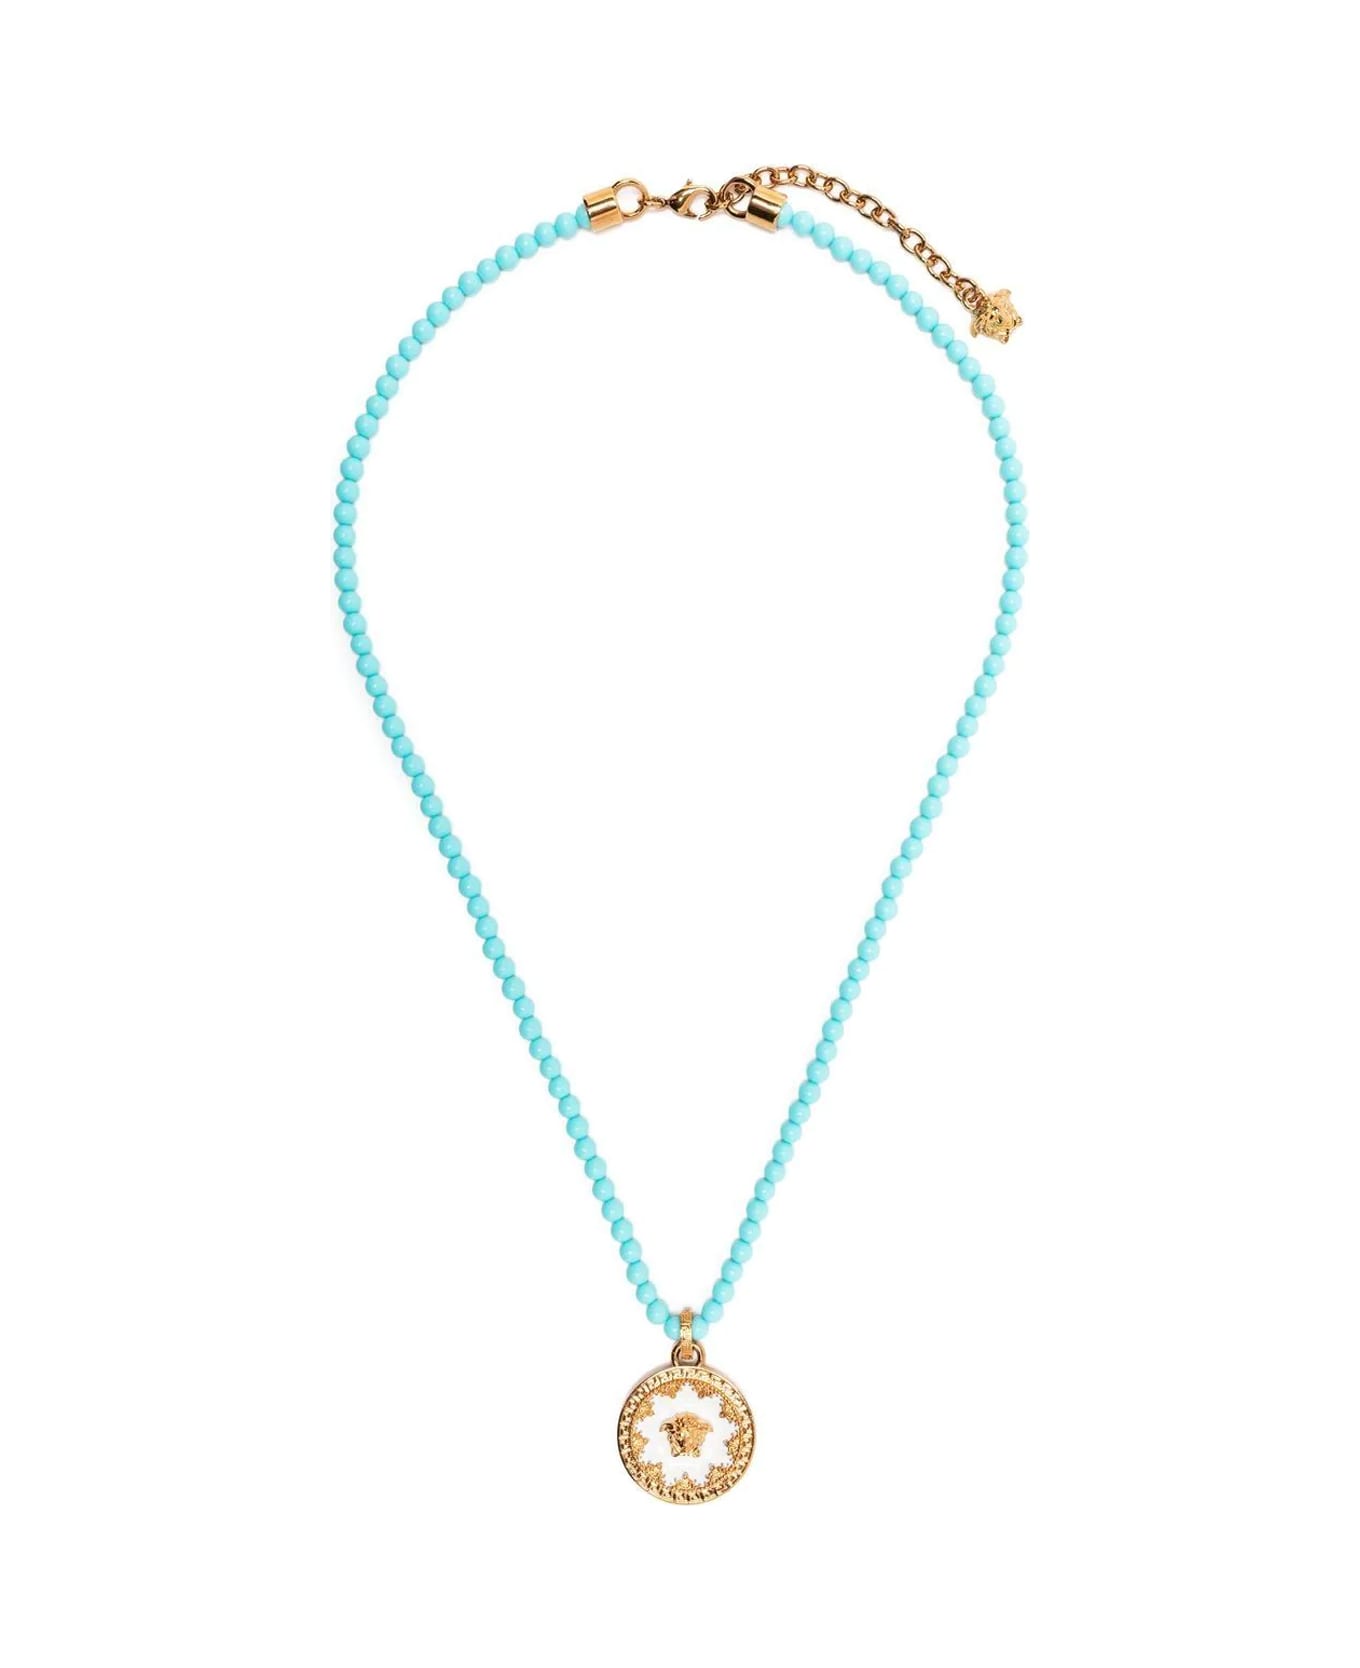 Versace Coral Pendant Necklace - Jhlo Versace Gold White Turquoise ネックレス